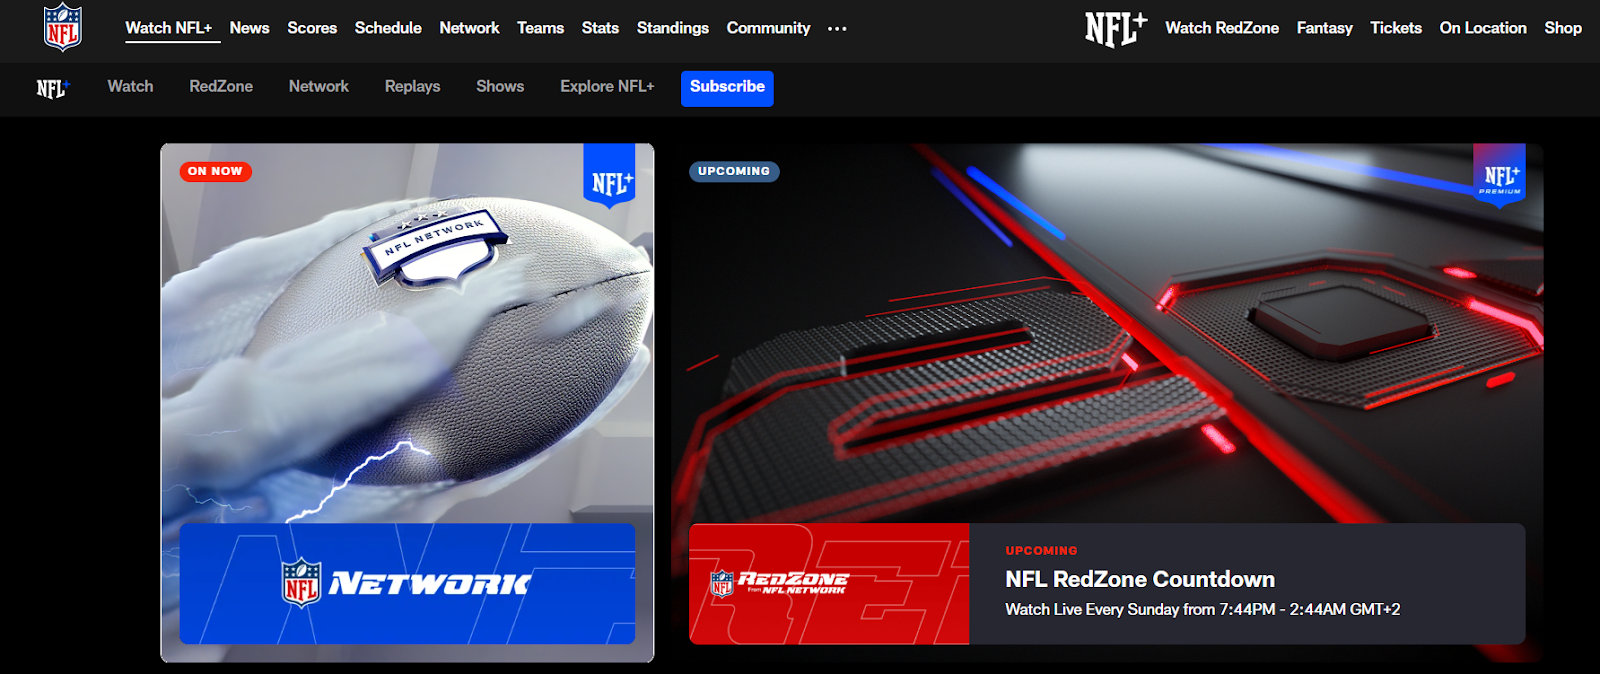 The NFL+ app gives you access to the NFL Network and RedZone channel
